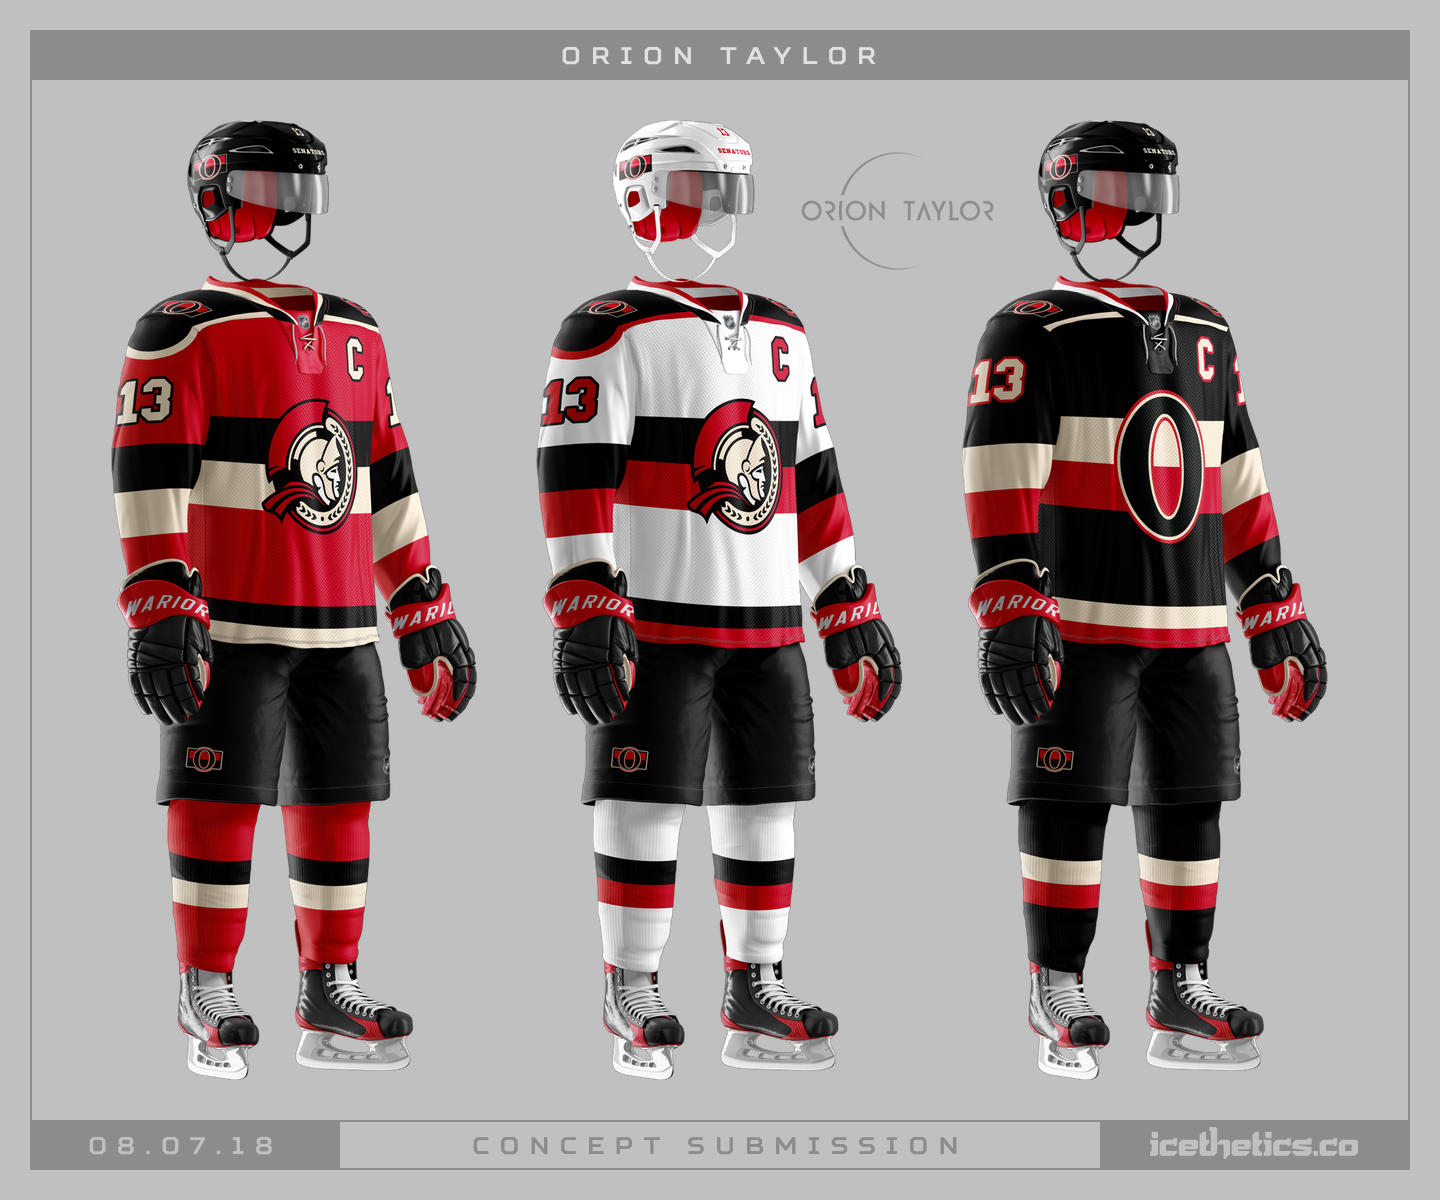 NHL on X: GOODNESS 😍 Feast your eyes on the new @Senators #ReverseRetro  threads! Inspired by the team's first third jersey from the 1997 season,  the uniform features curved stripes and on